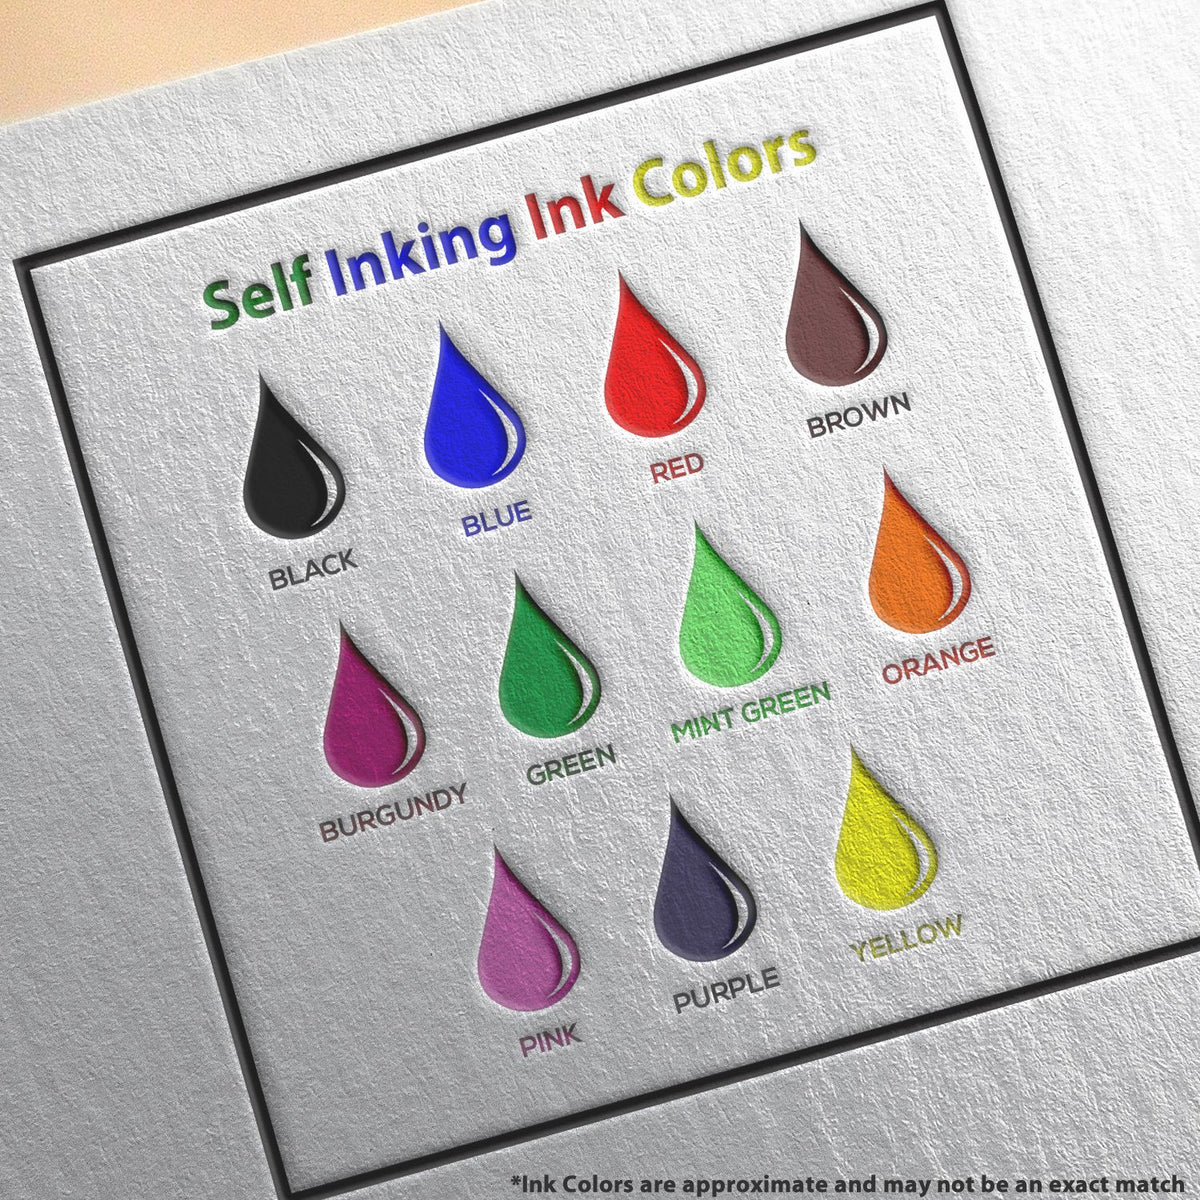 A picture showing the different ink colors or hues available for the Self-Inking Arizona PE Stamp product.